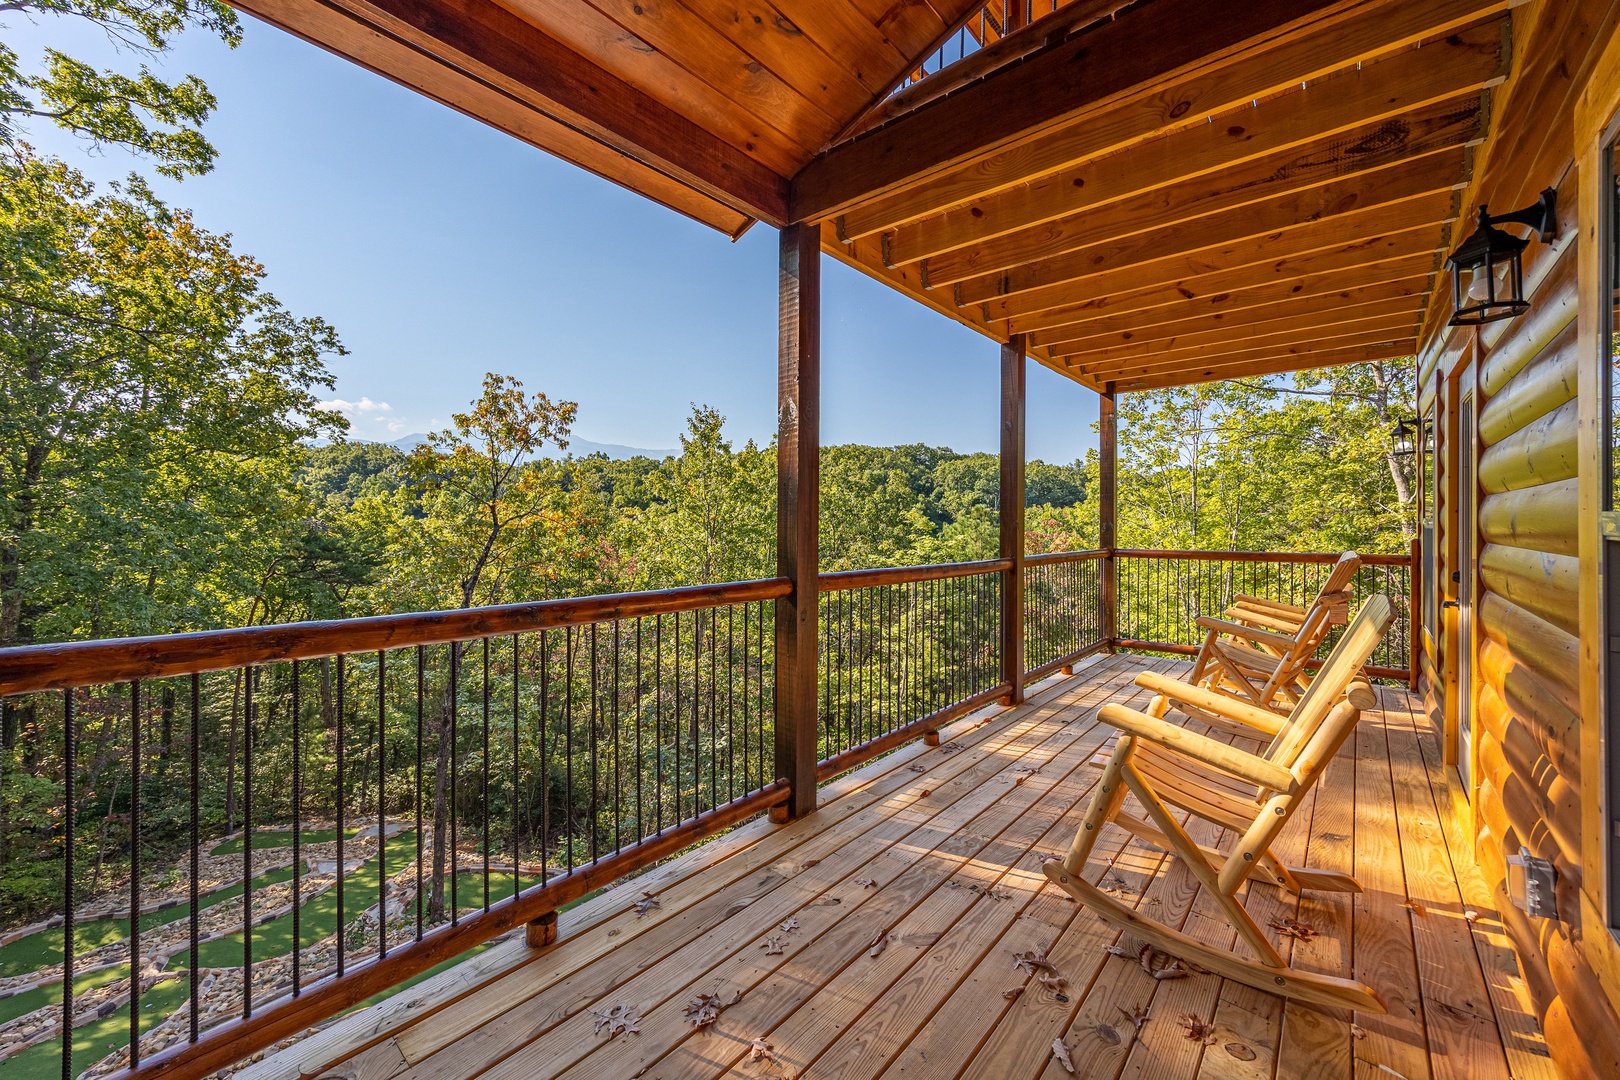 Covered Deck with Rocking Chairs at Make A Splash, a 2 bedroom cabin rental located in gatlinburg